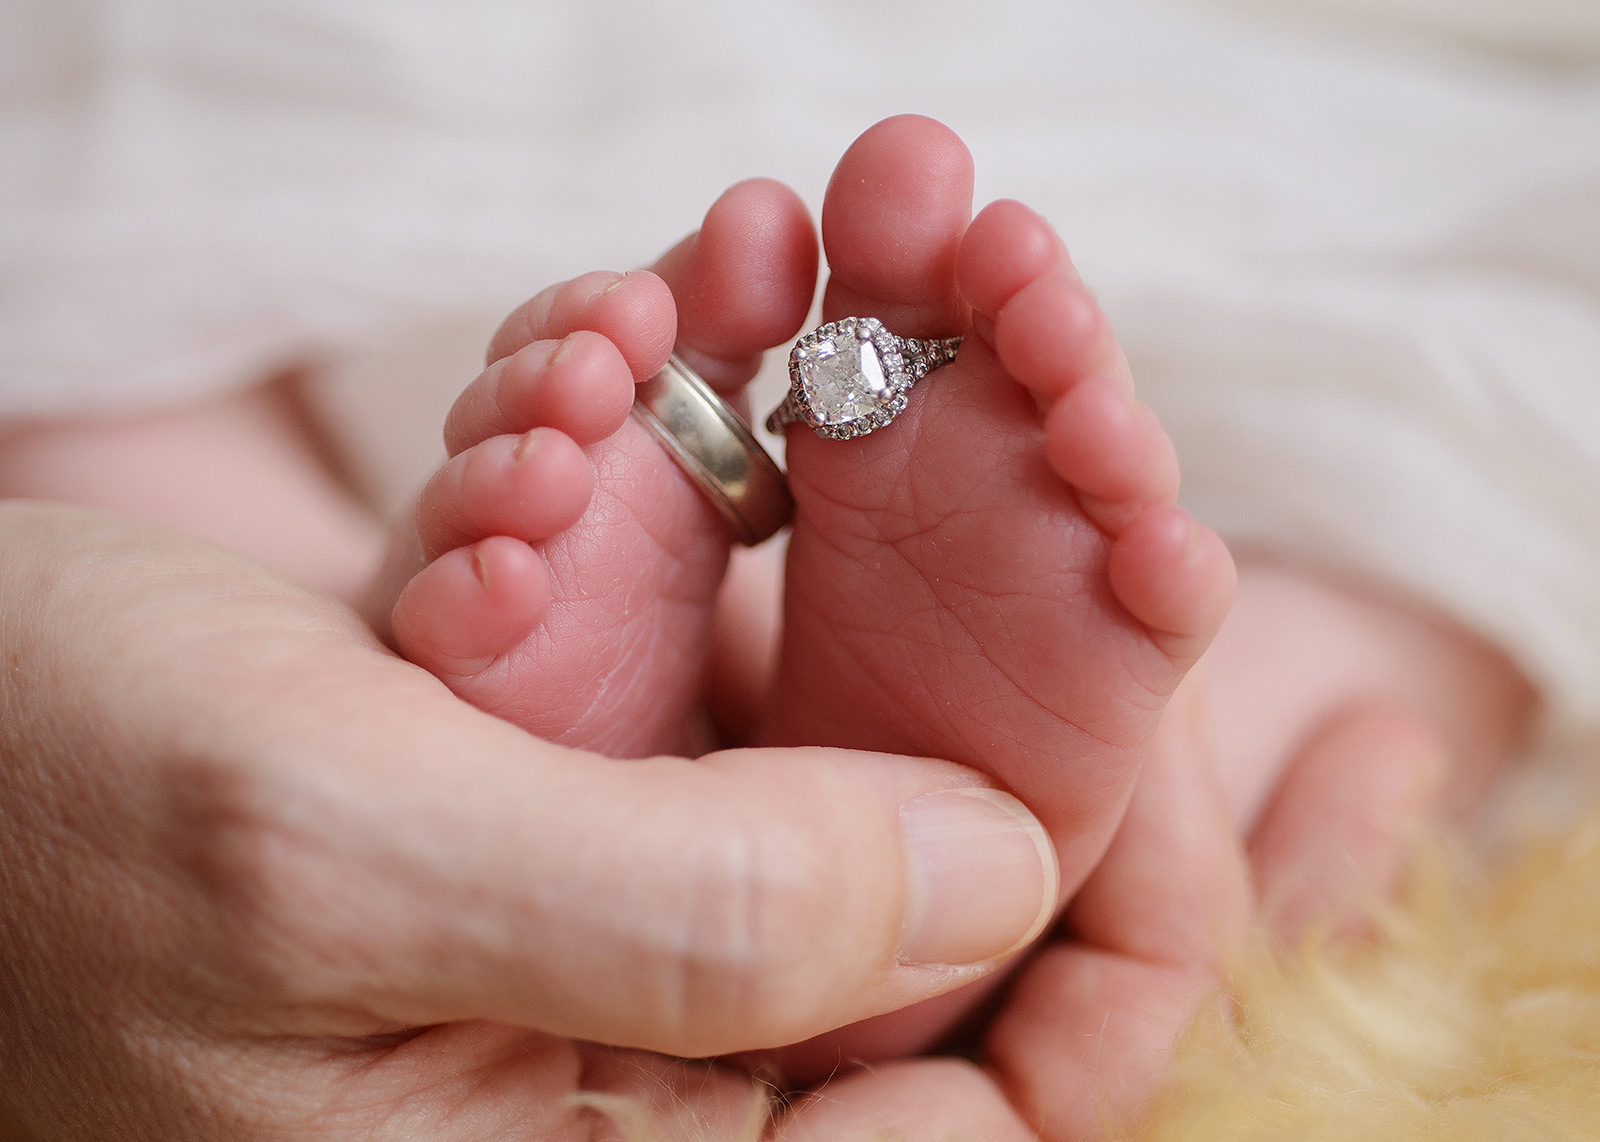 Newborn baby toes with wedding rings